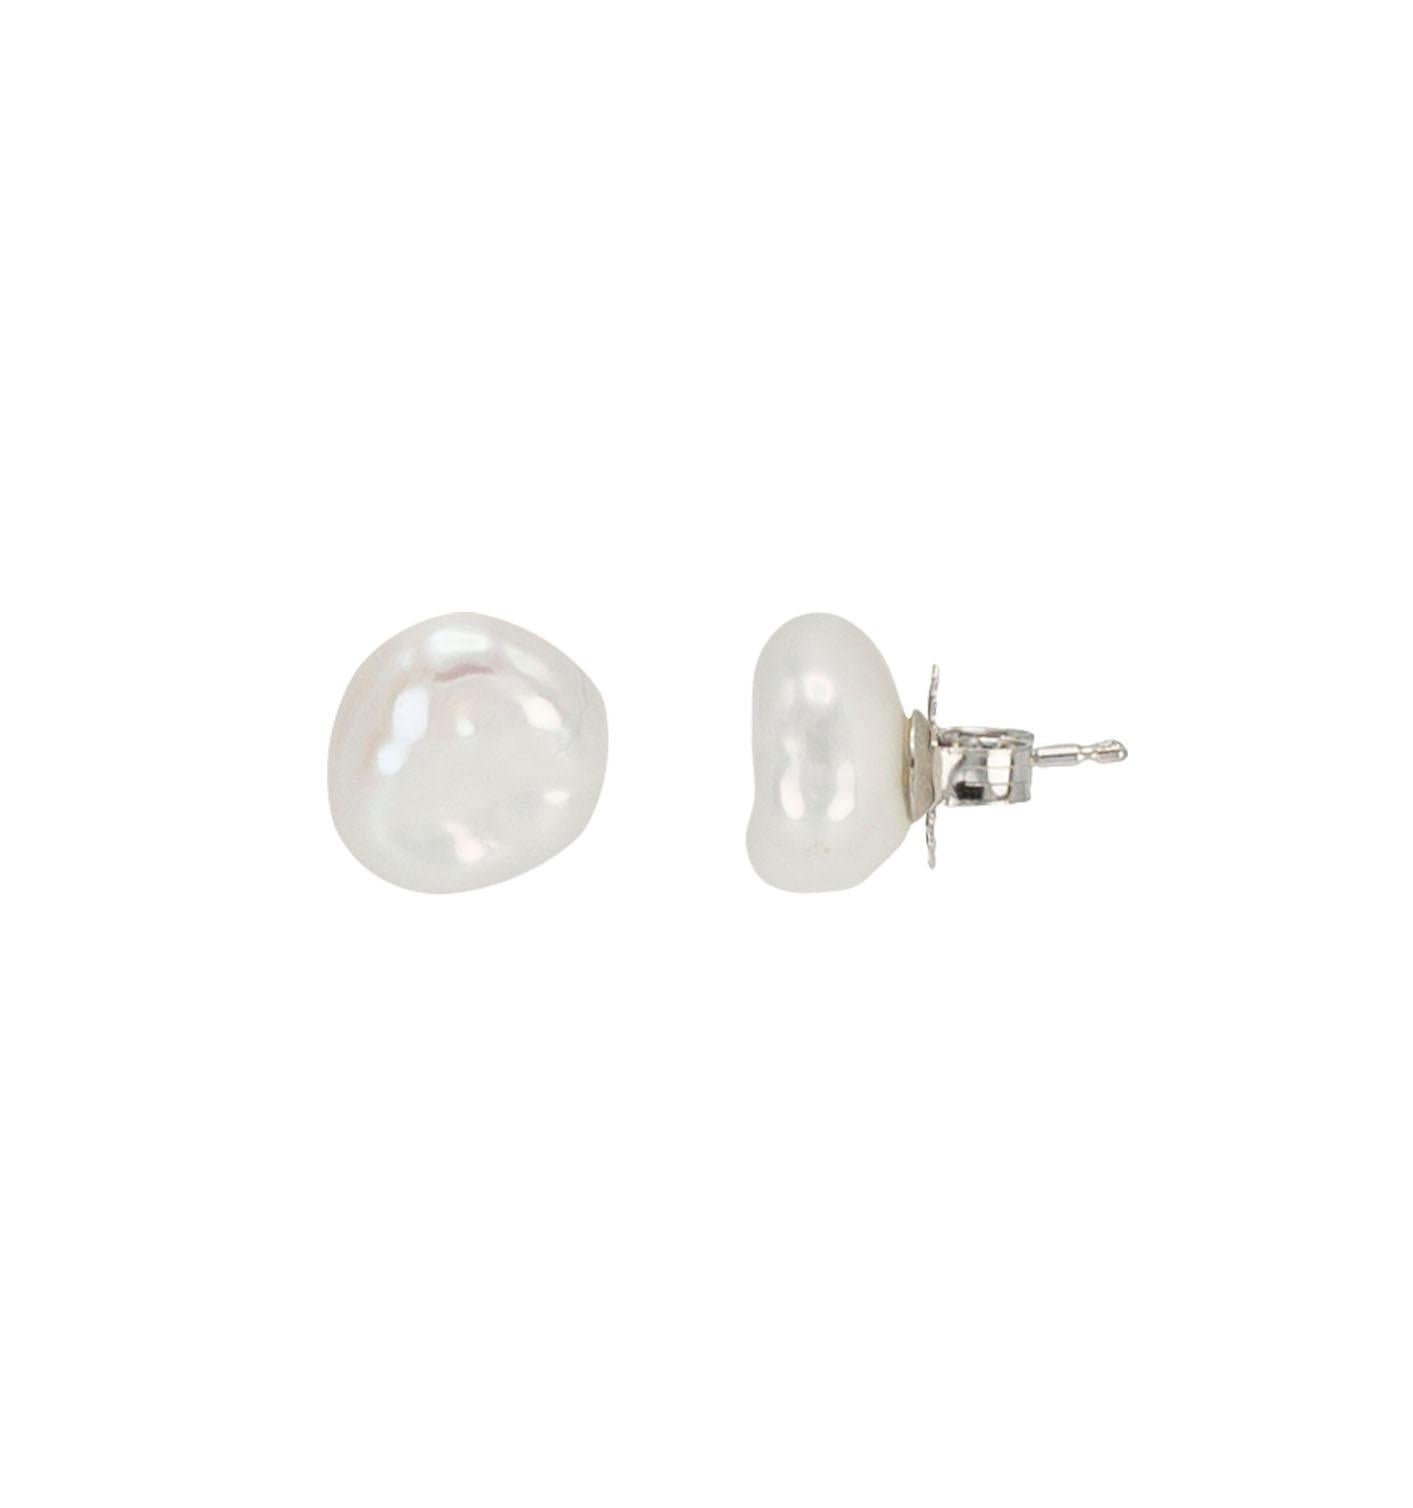 These stunning white Keshi pearl studs measure 8-9mm and feature 14K White Gold posts and backings. They are the perfect everyday stud that you can dress up or down!